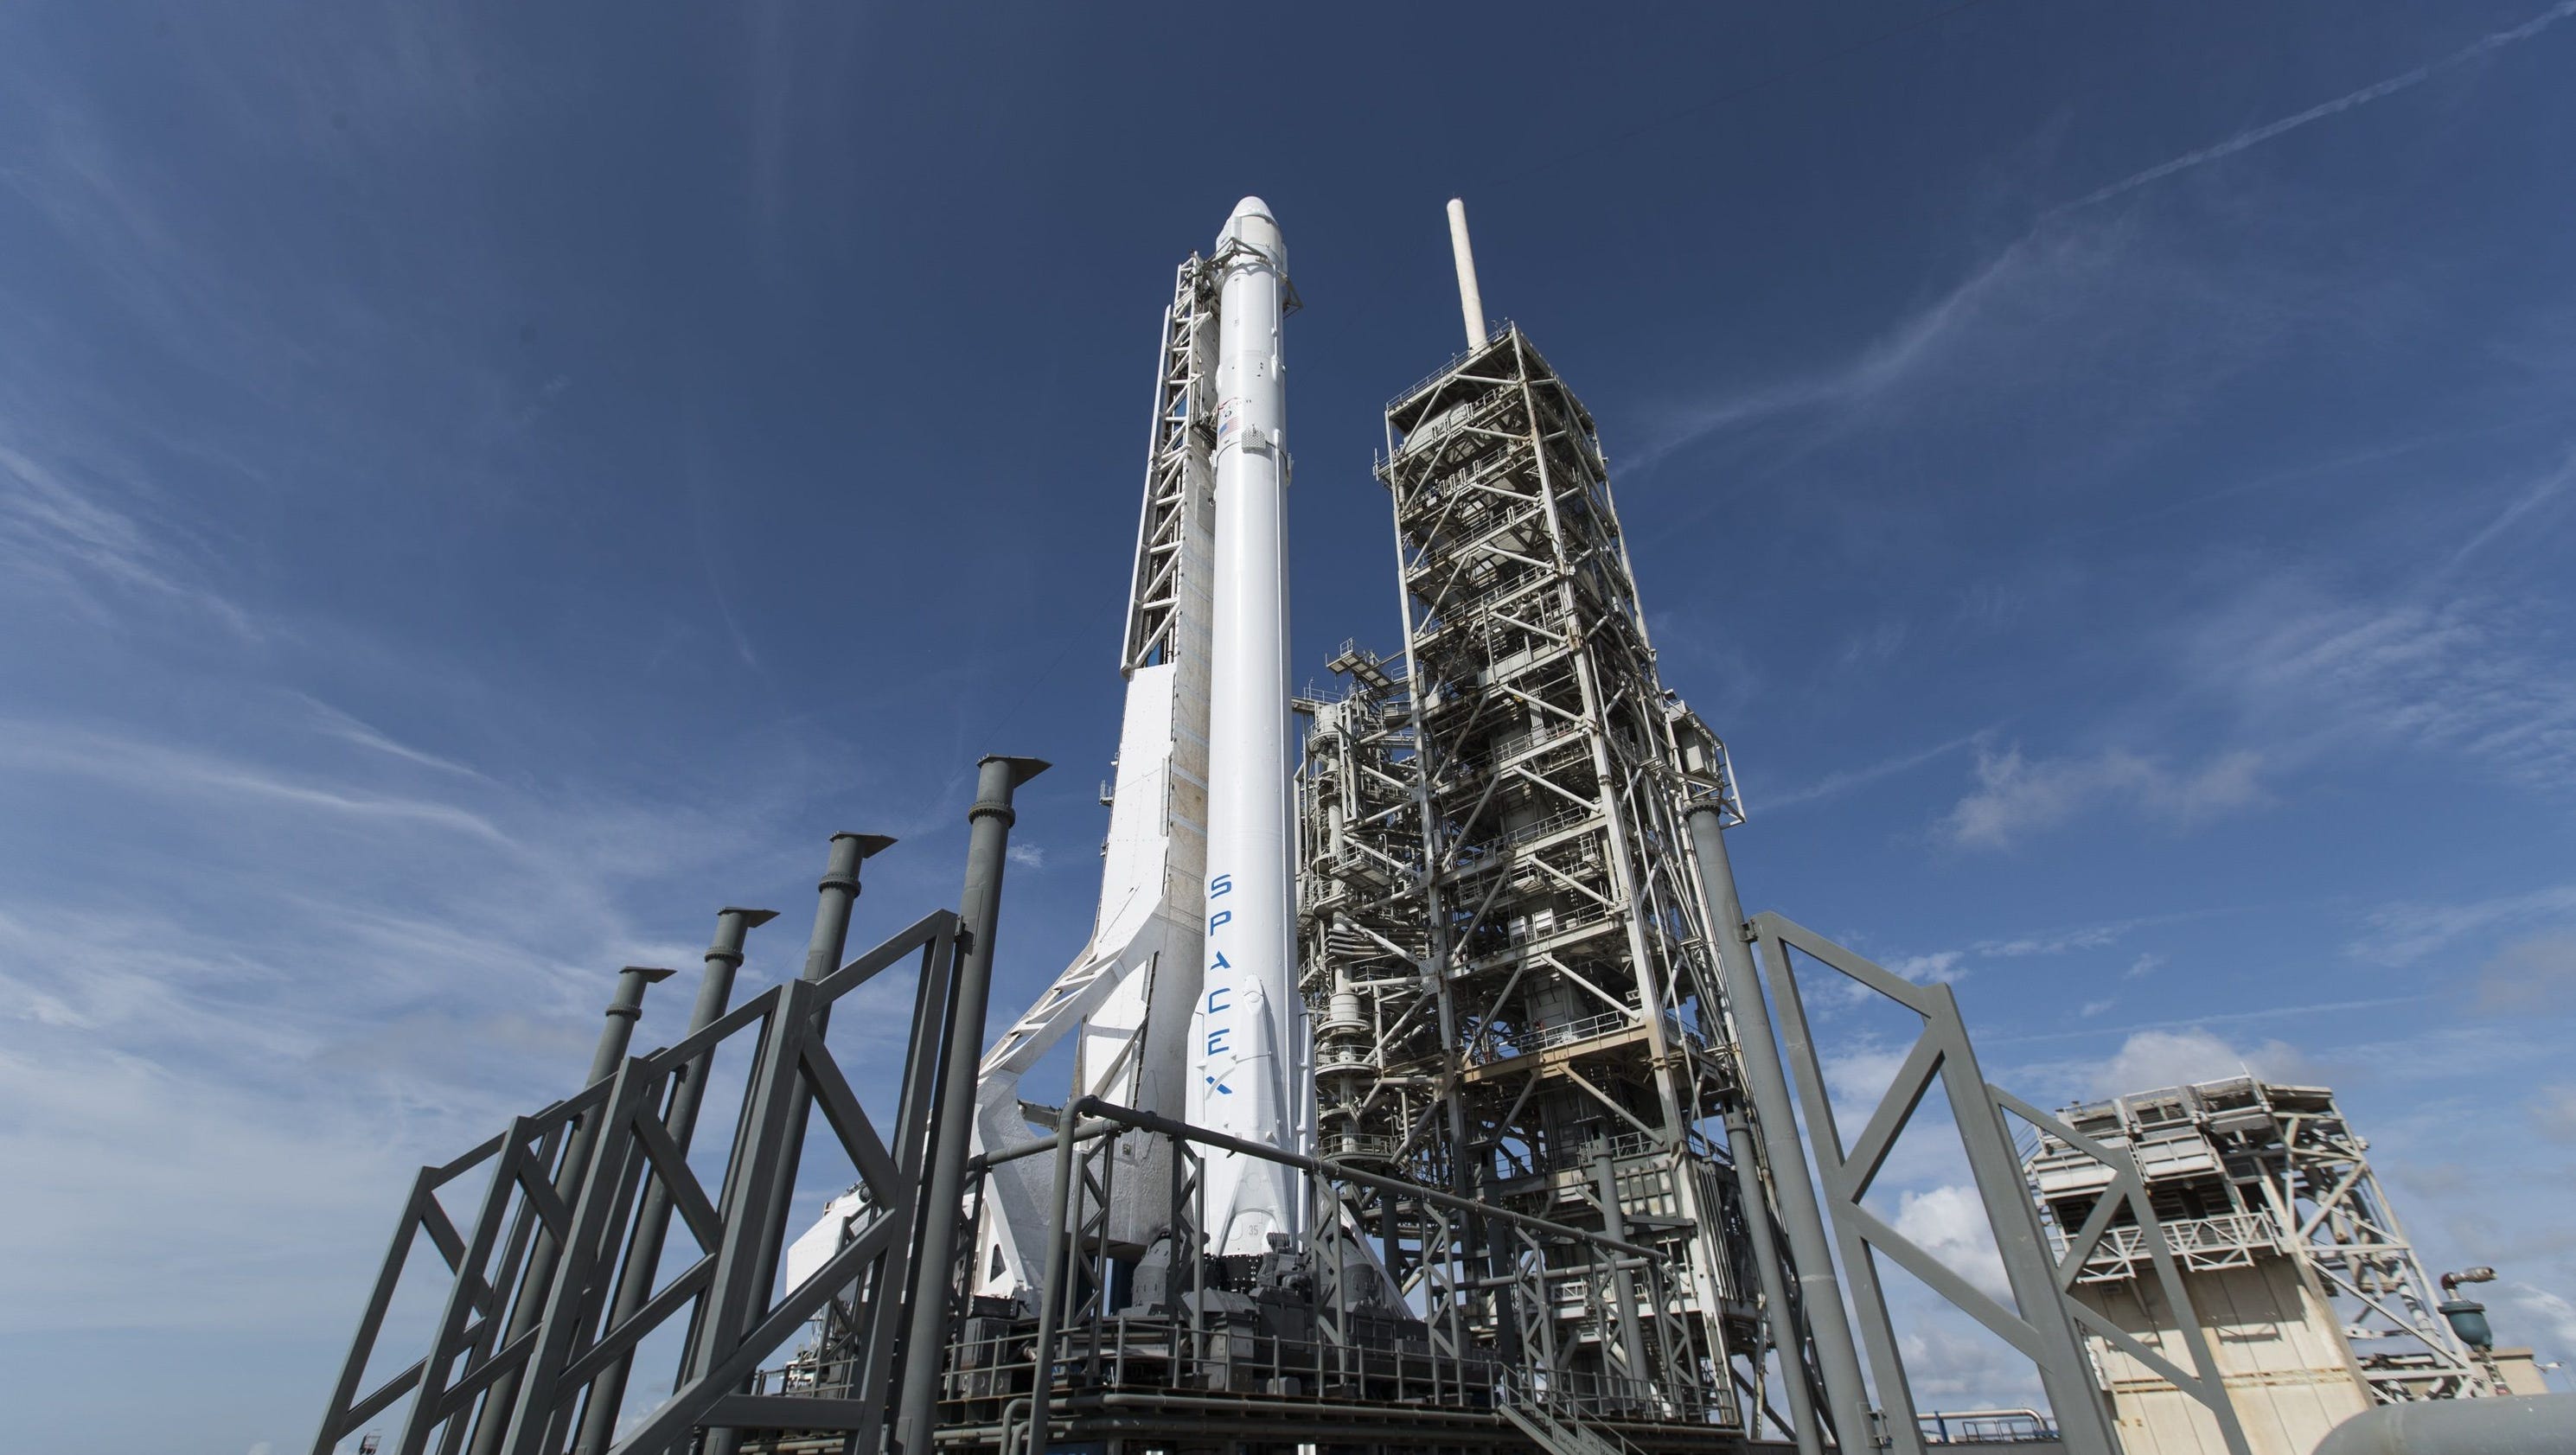 Live Stream: SpaceX's Falcon 9 launches at NASA’s Kennedy Space Center in Florida3200 x 1680